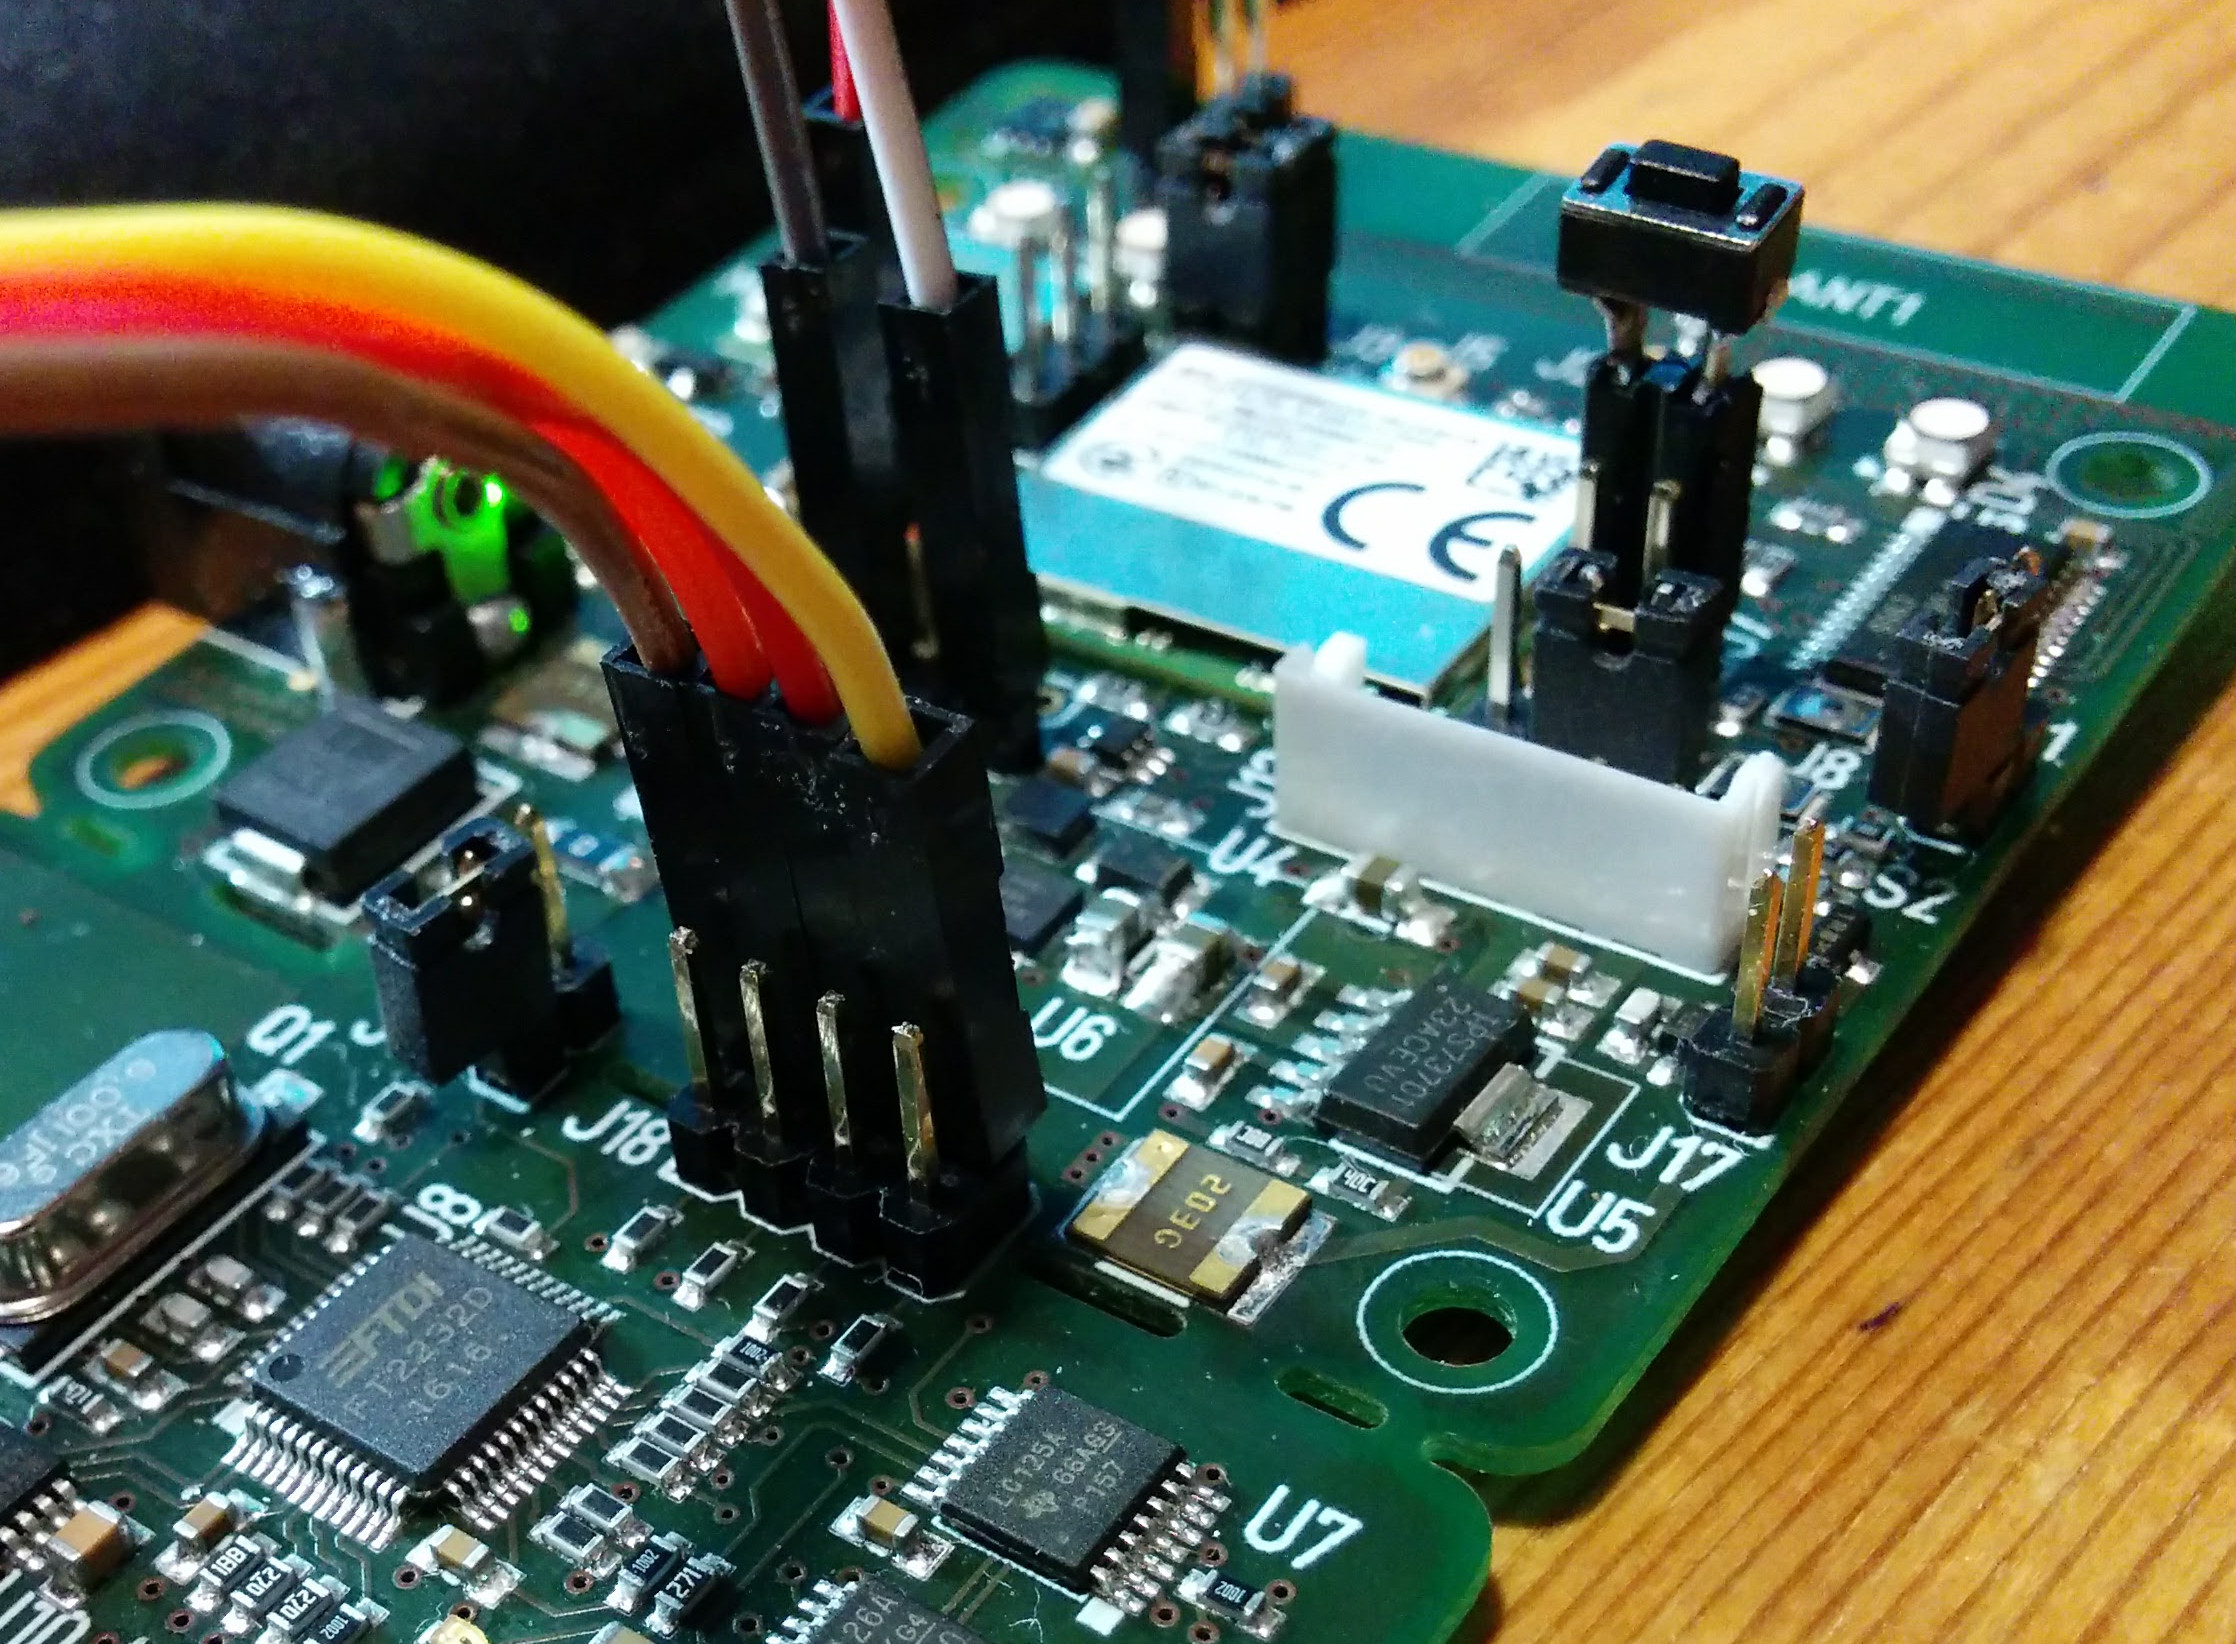 JTAG connections on the SensorWeb board